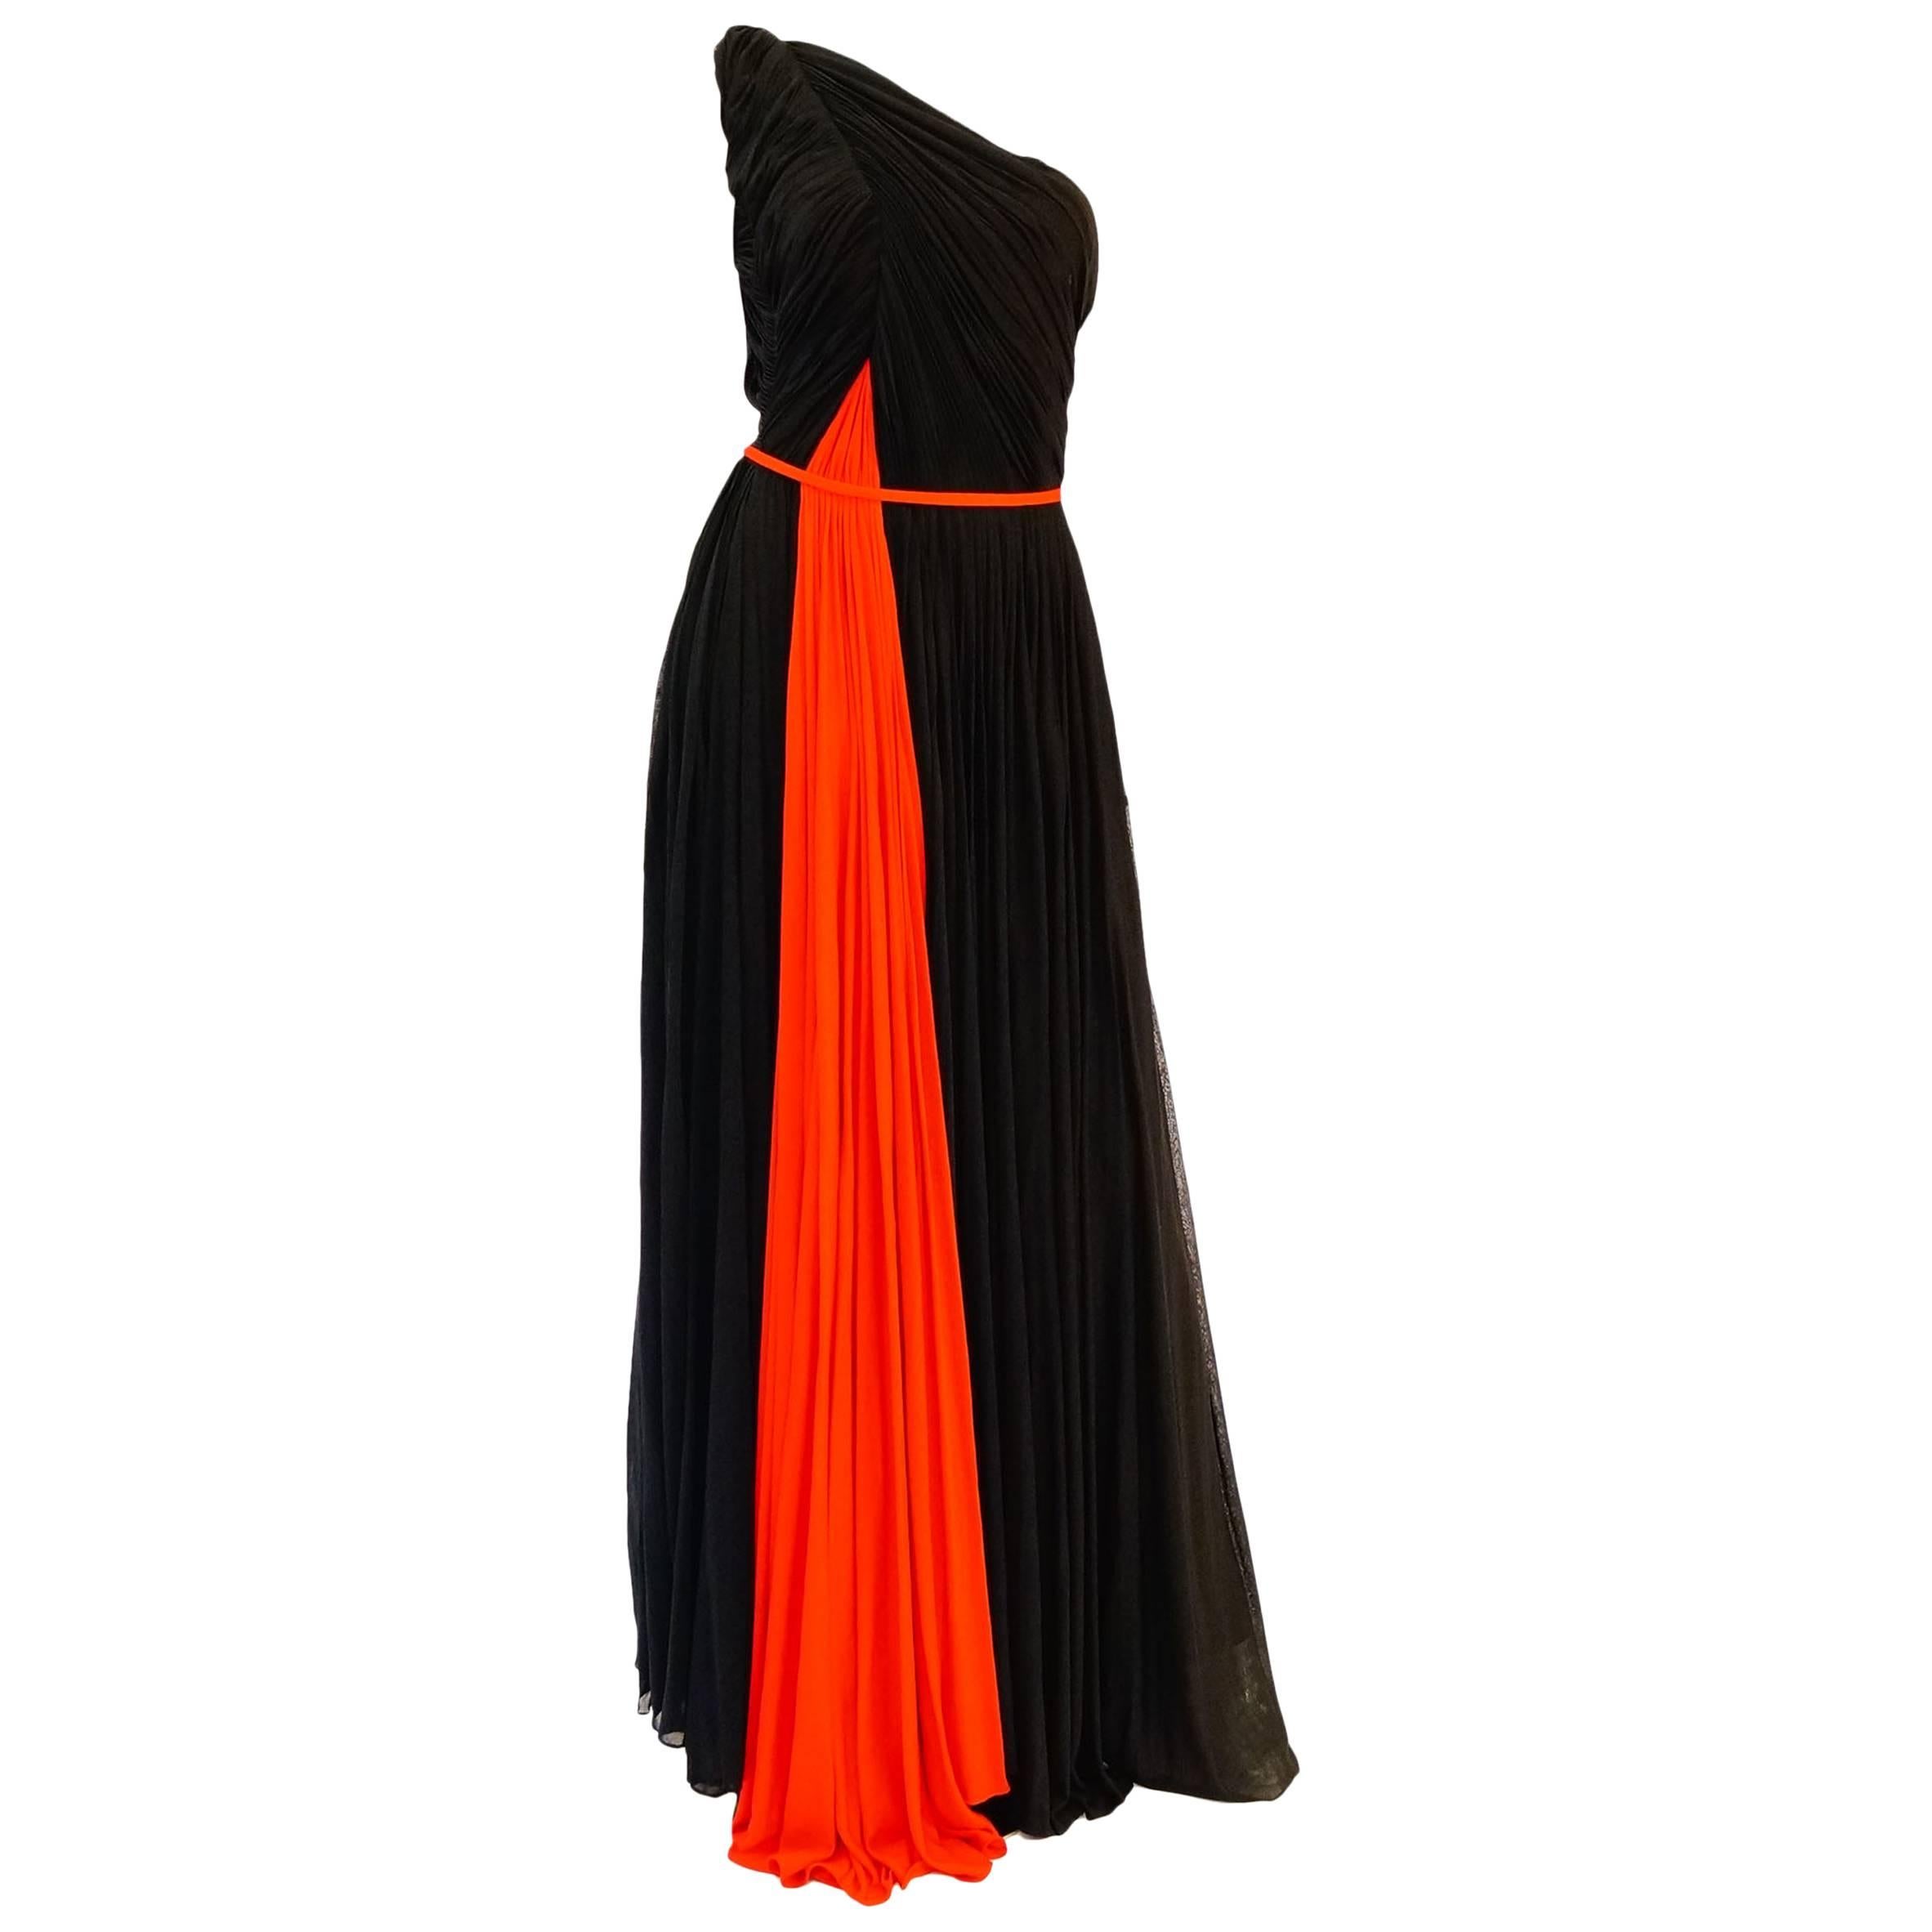 Important 1940s Madame Grès Grecian Goddess Silk Knit Gown in Black and Red